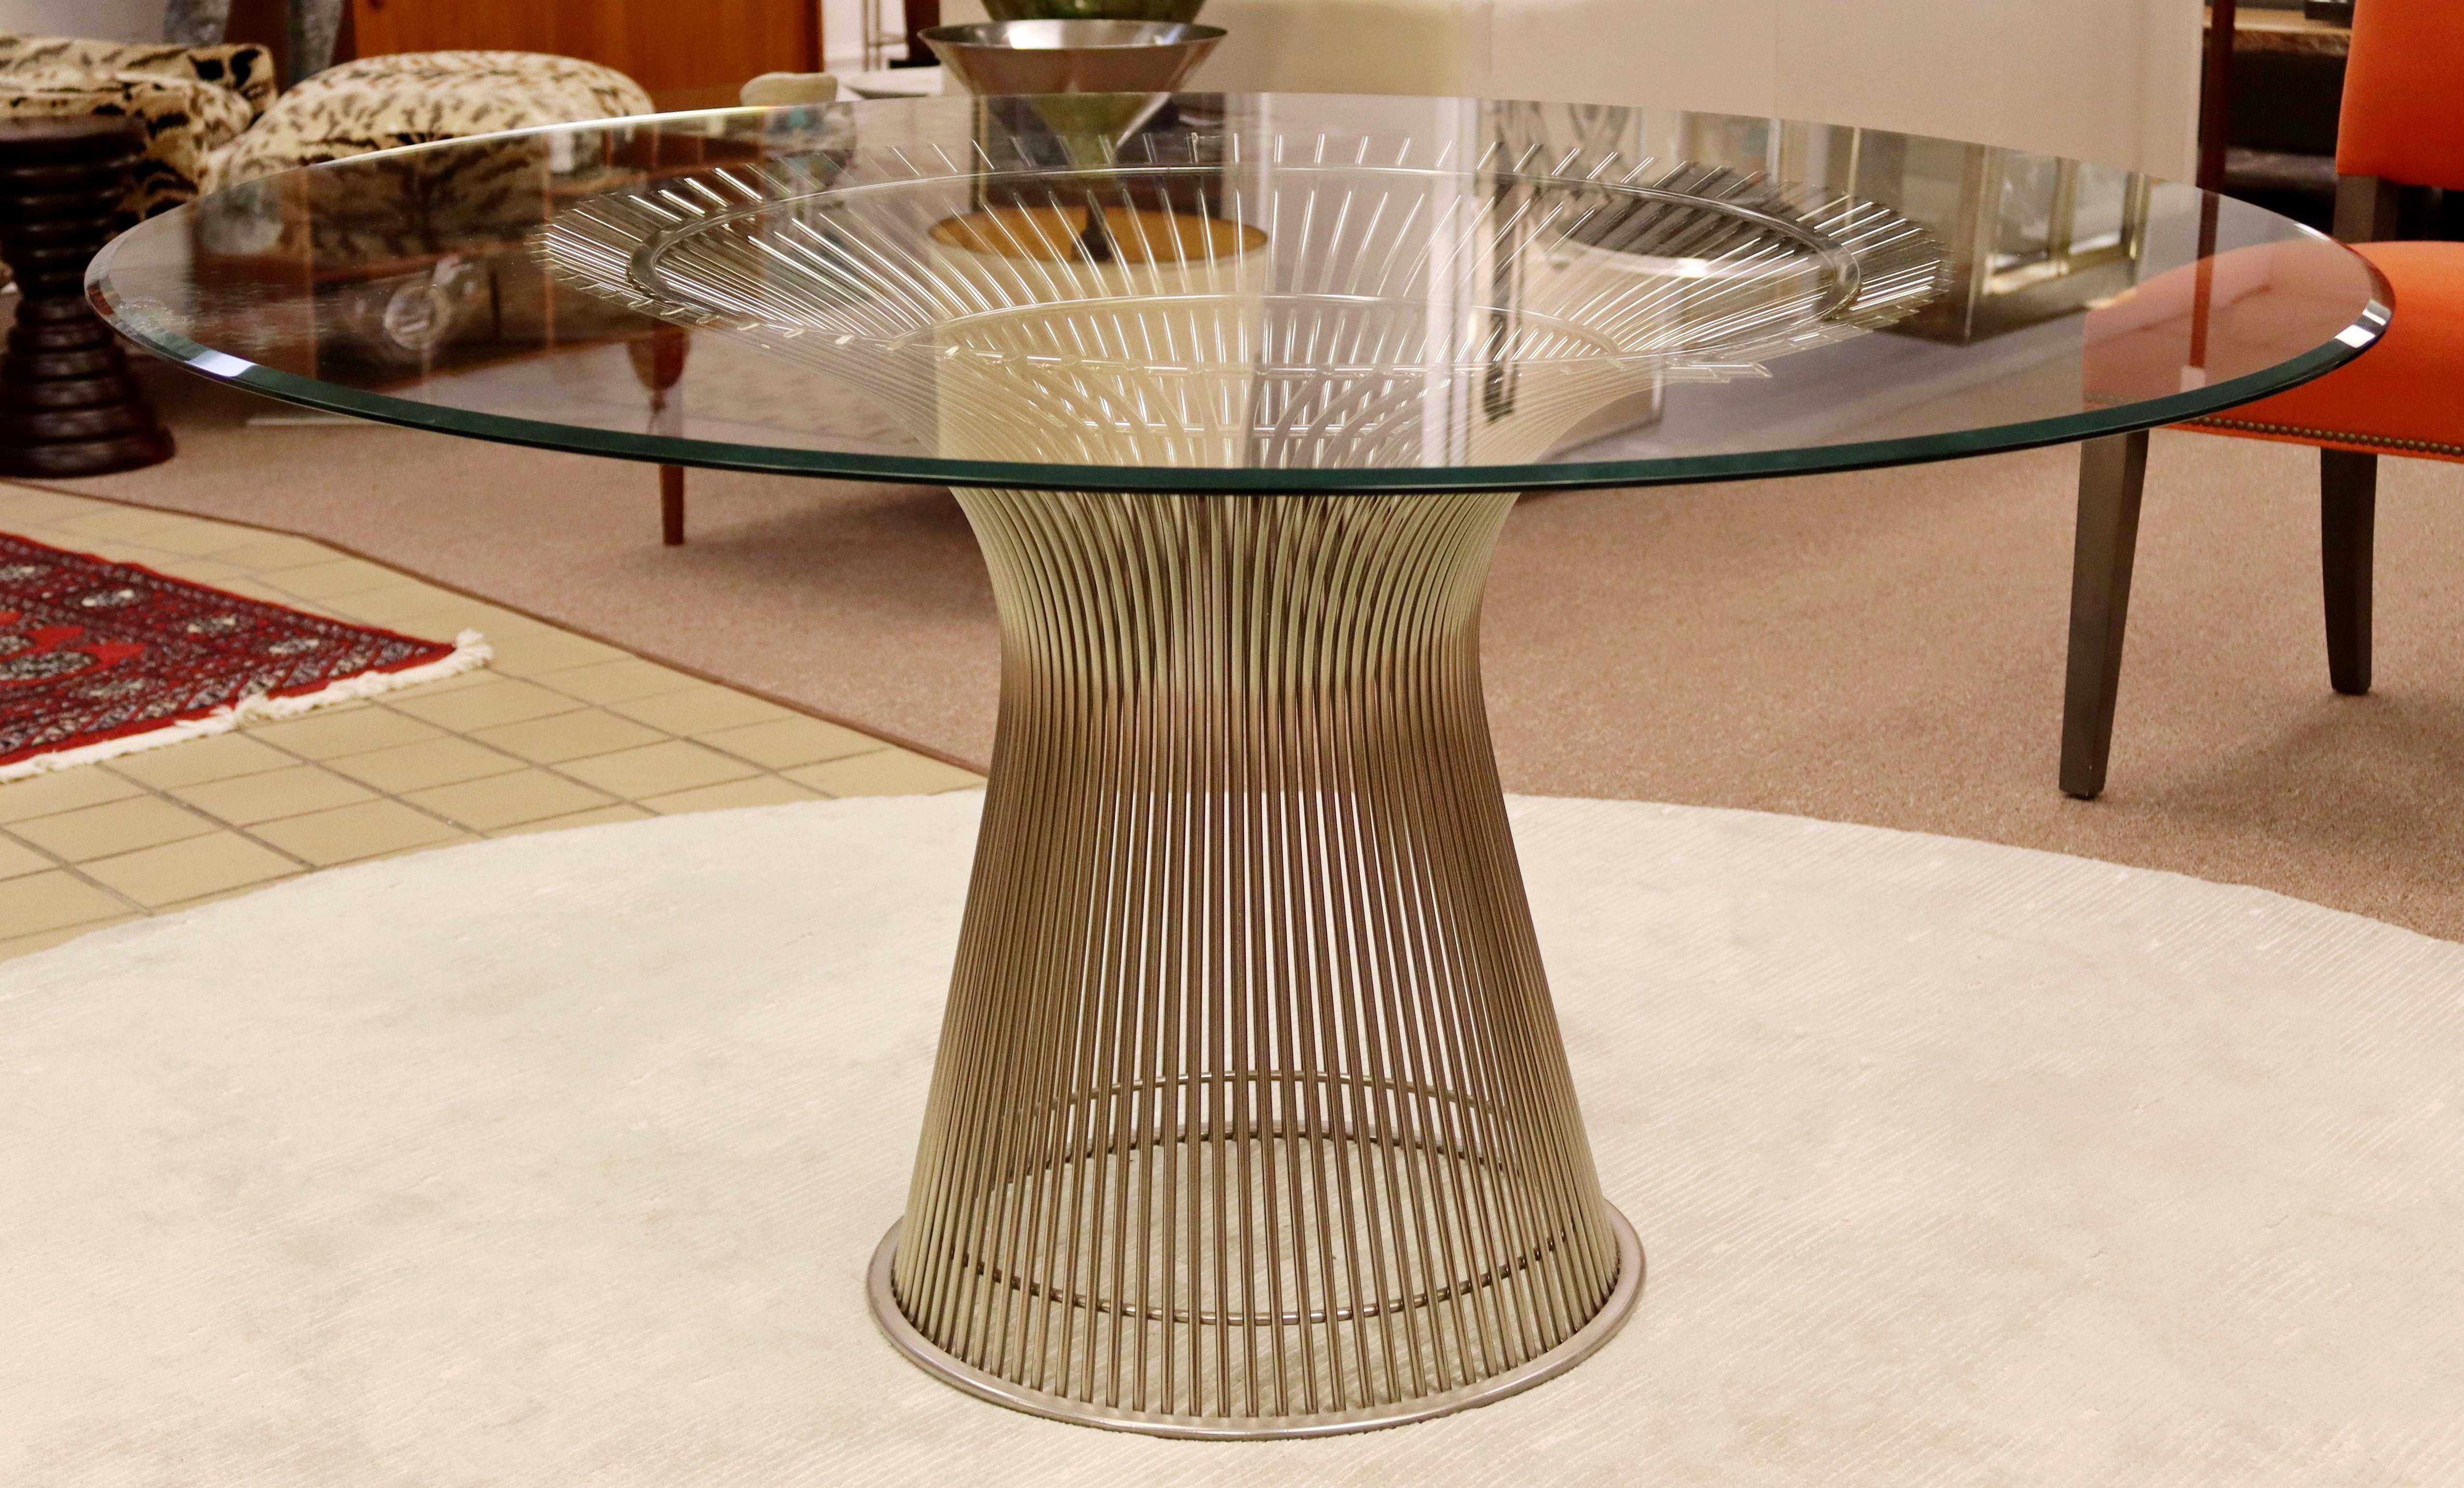 For your consideration is an incredible dining table, with a glass top on a steel wire base, Warren Platner style. In excellent vintage condition. The dimensions are 53